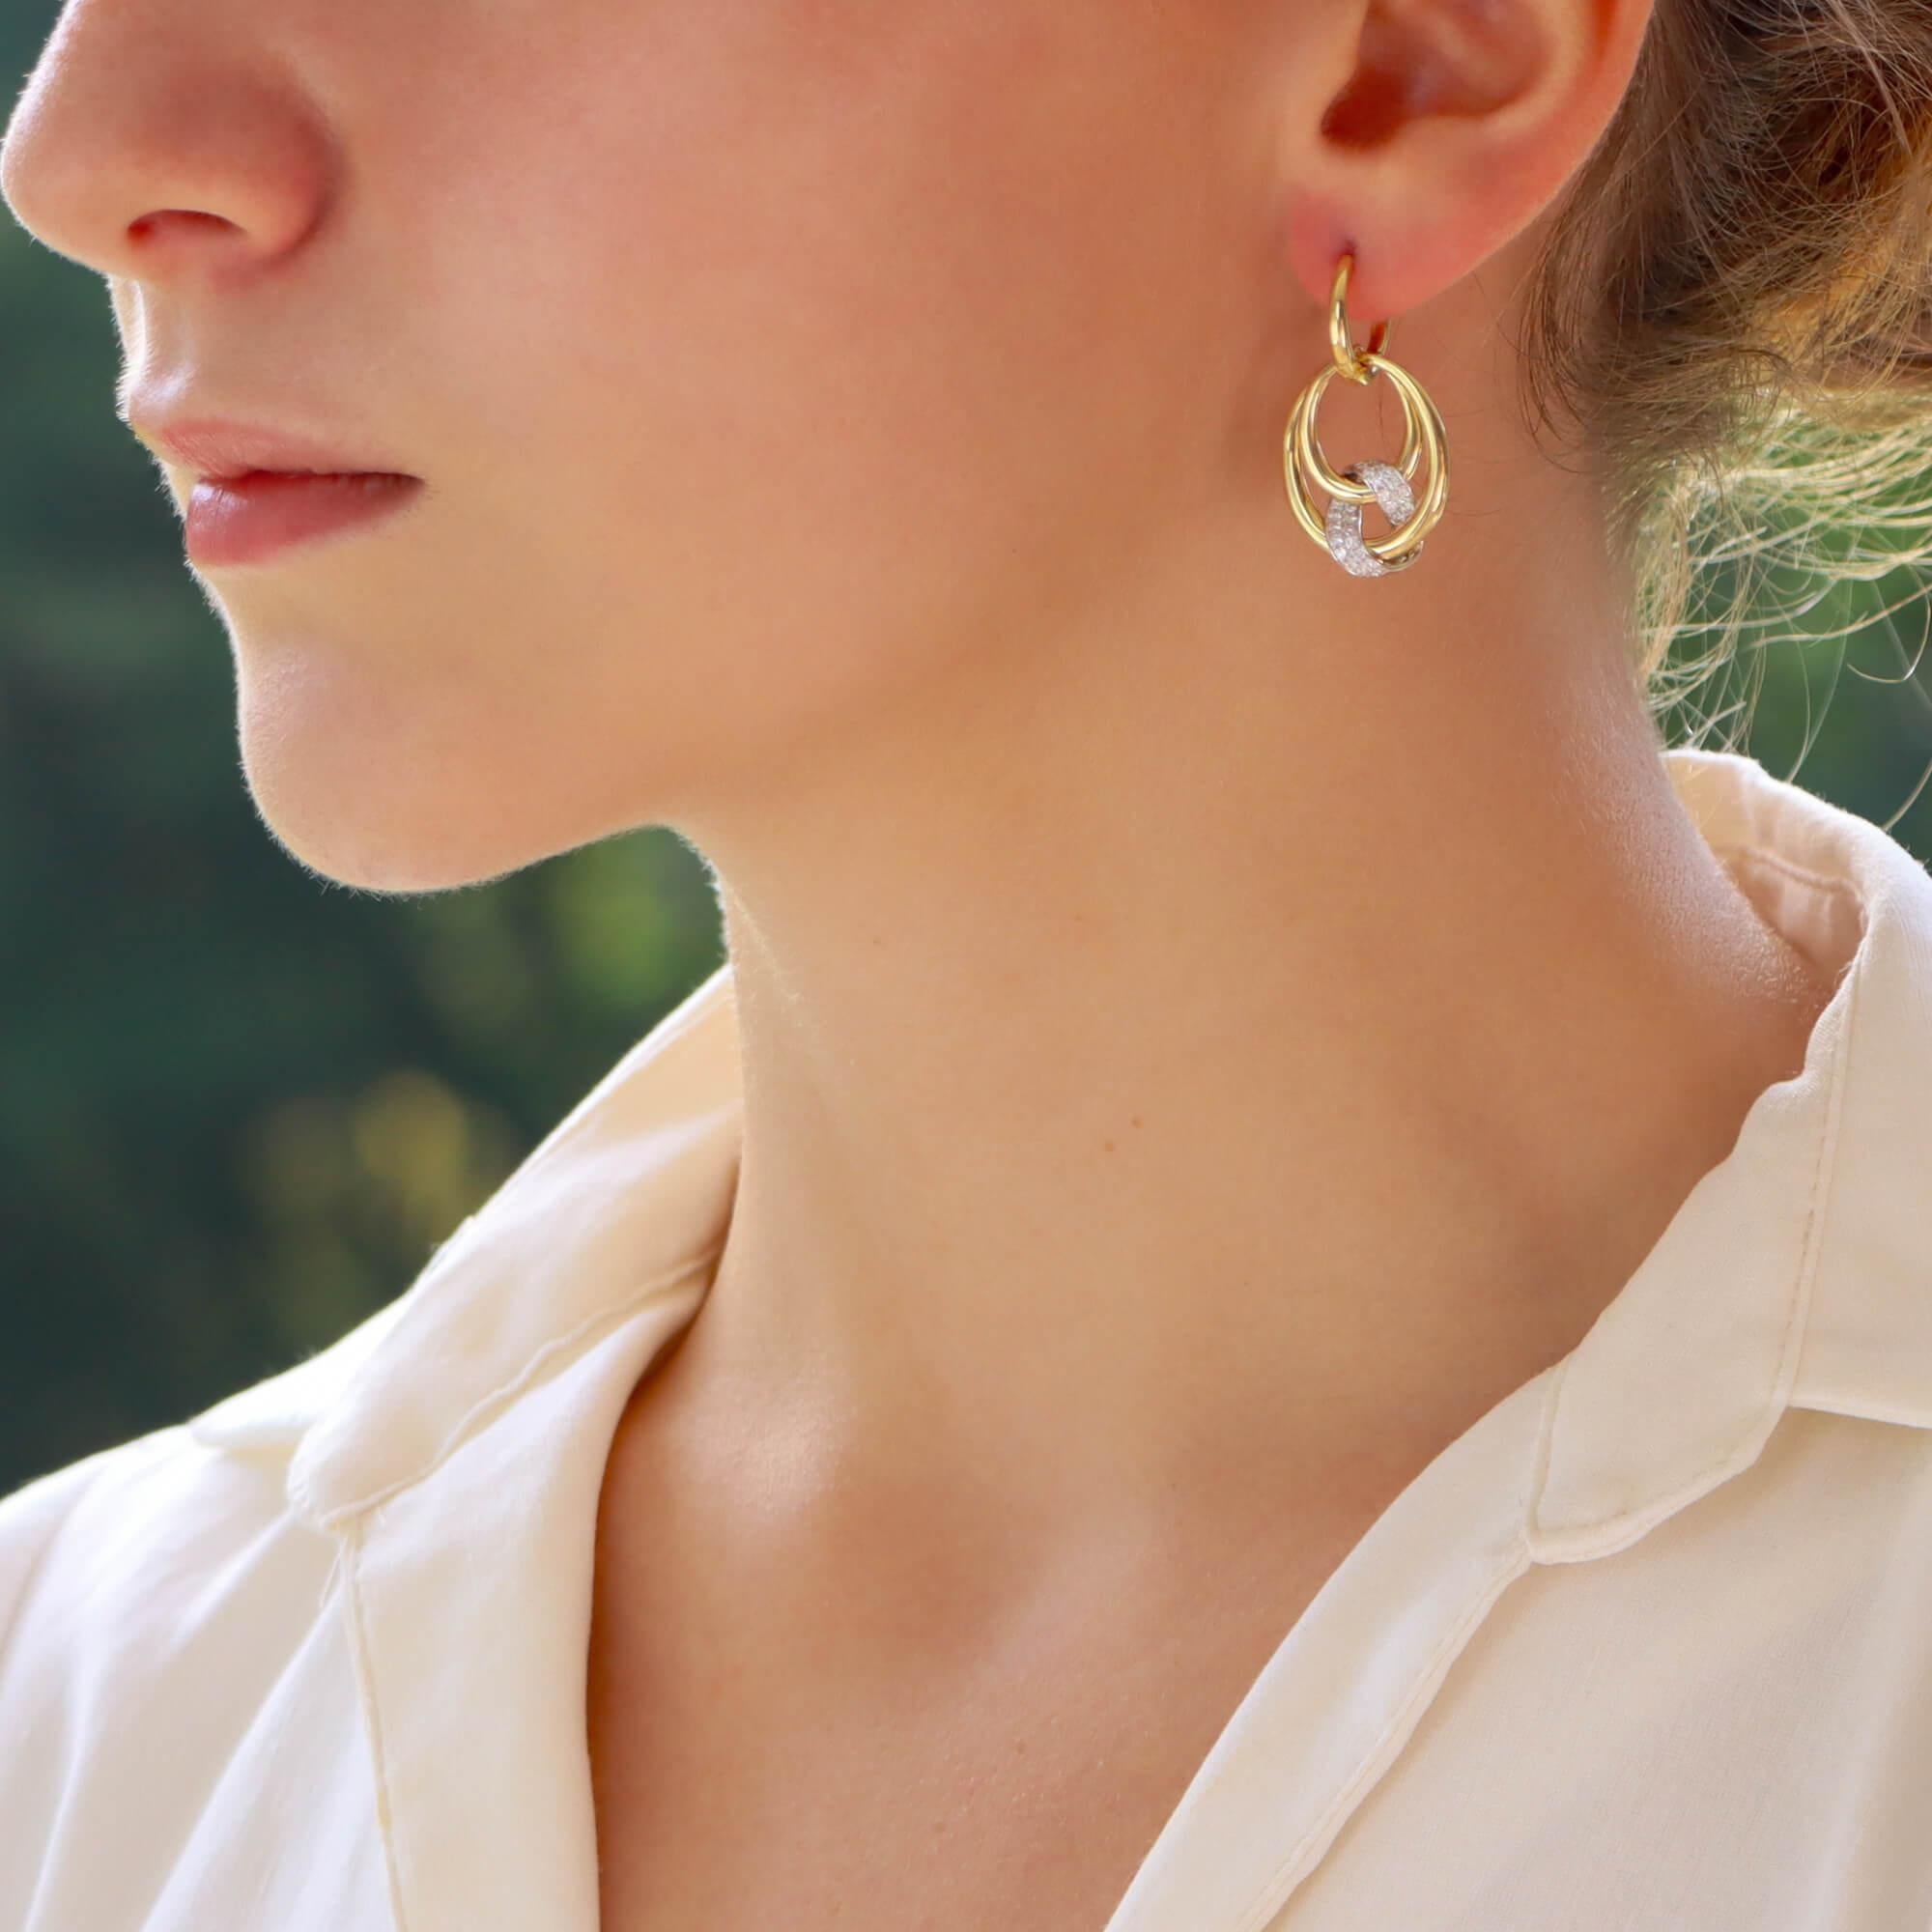 A beautiful contemporary pair of diamond earrings set in 18k yellow gold. 

The earrings are firstly composed of a yellow gold hoop which is secured with a push click fitting. Hanging from this hoop is an intertwined circle design with pave set